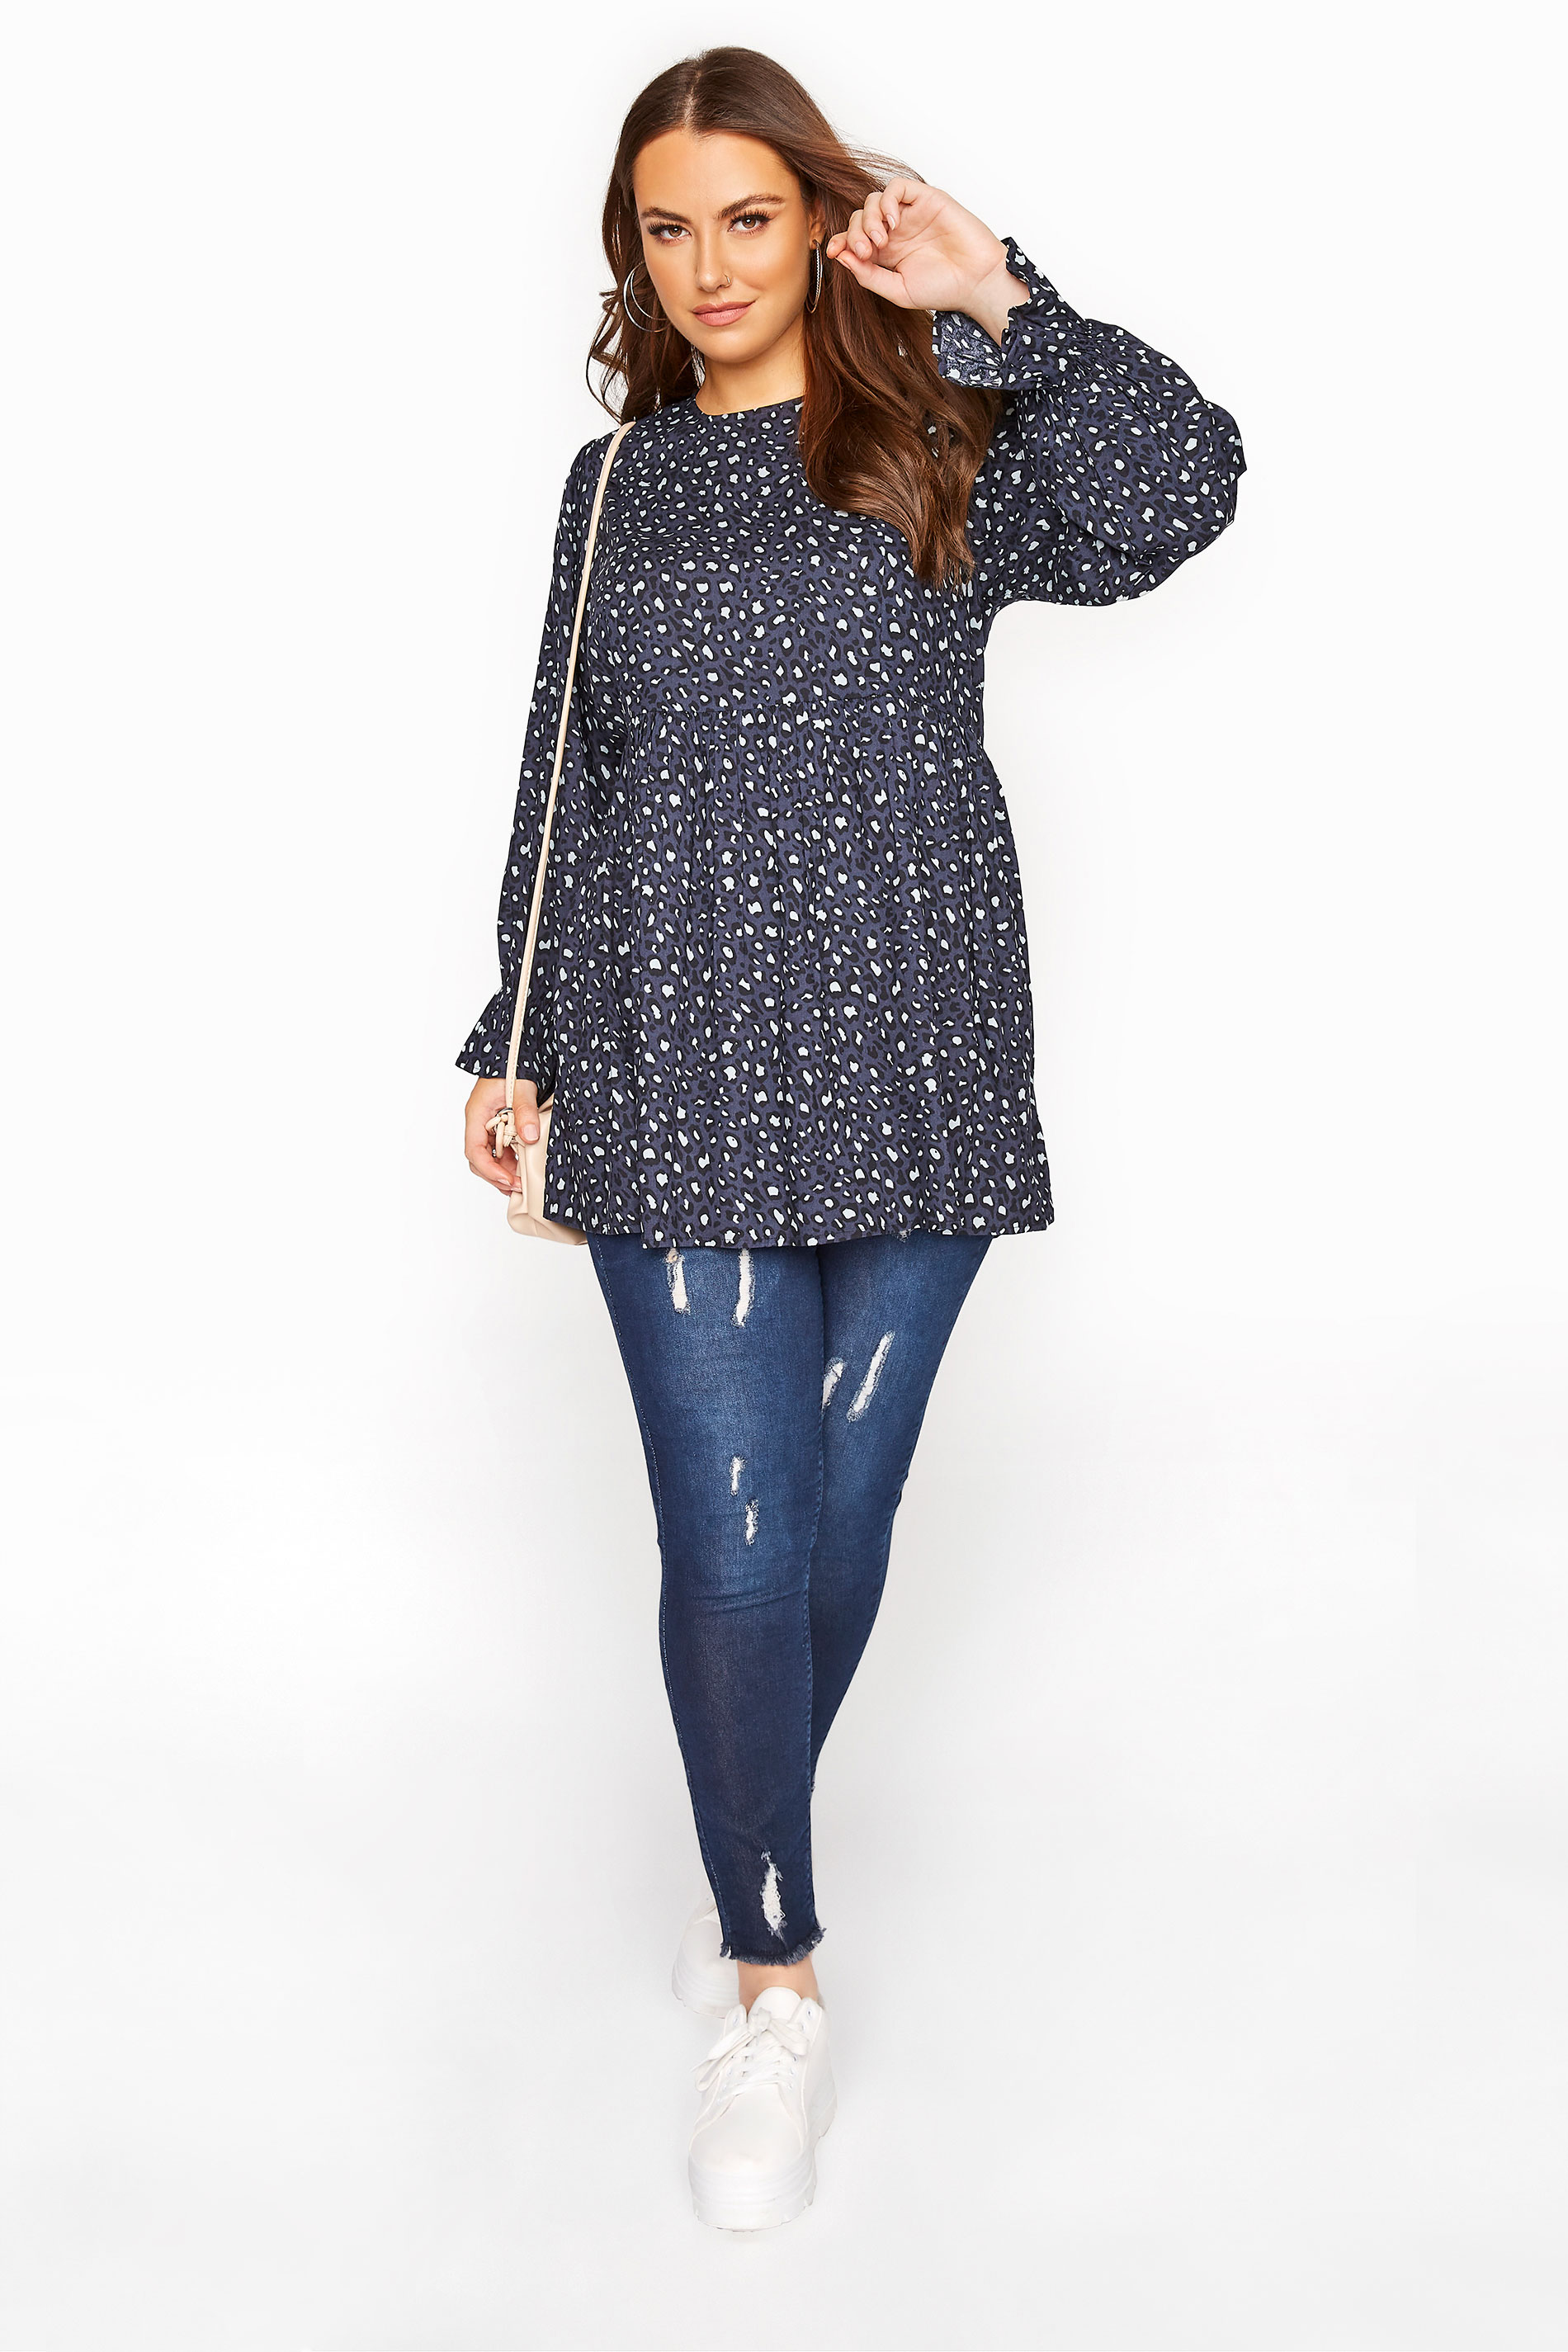 LIMITED COLLECTION Blue Animal Blouse | Yours Clothing 2